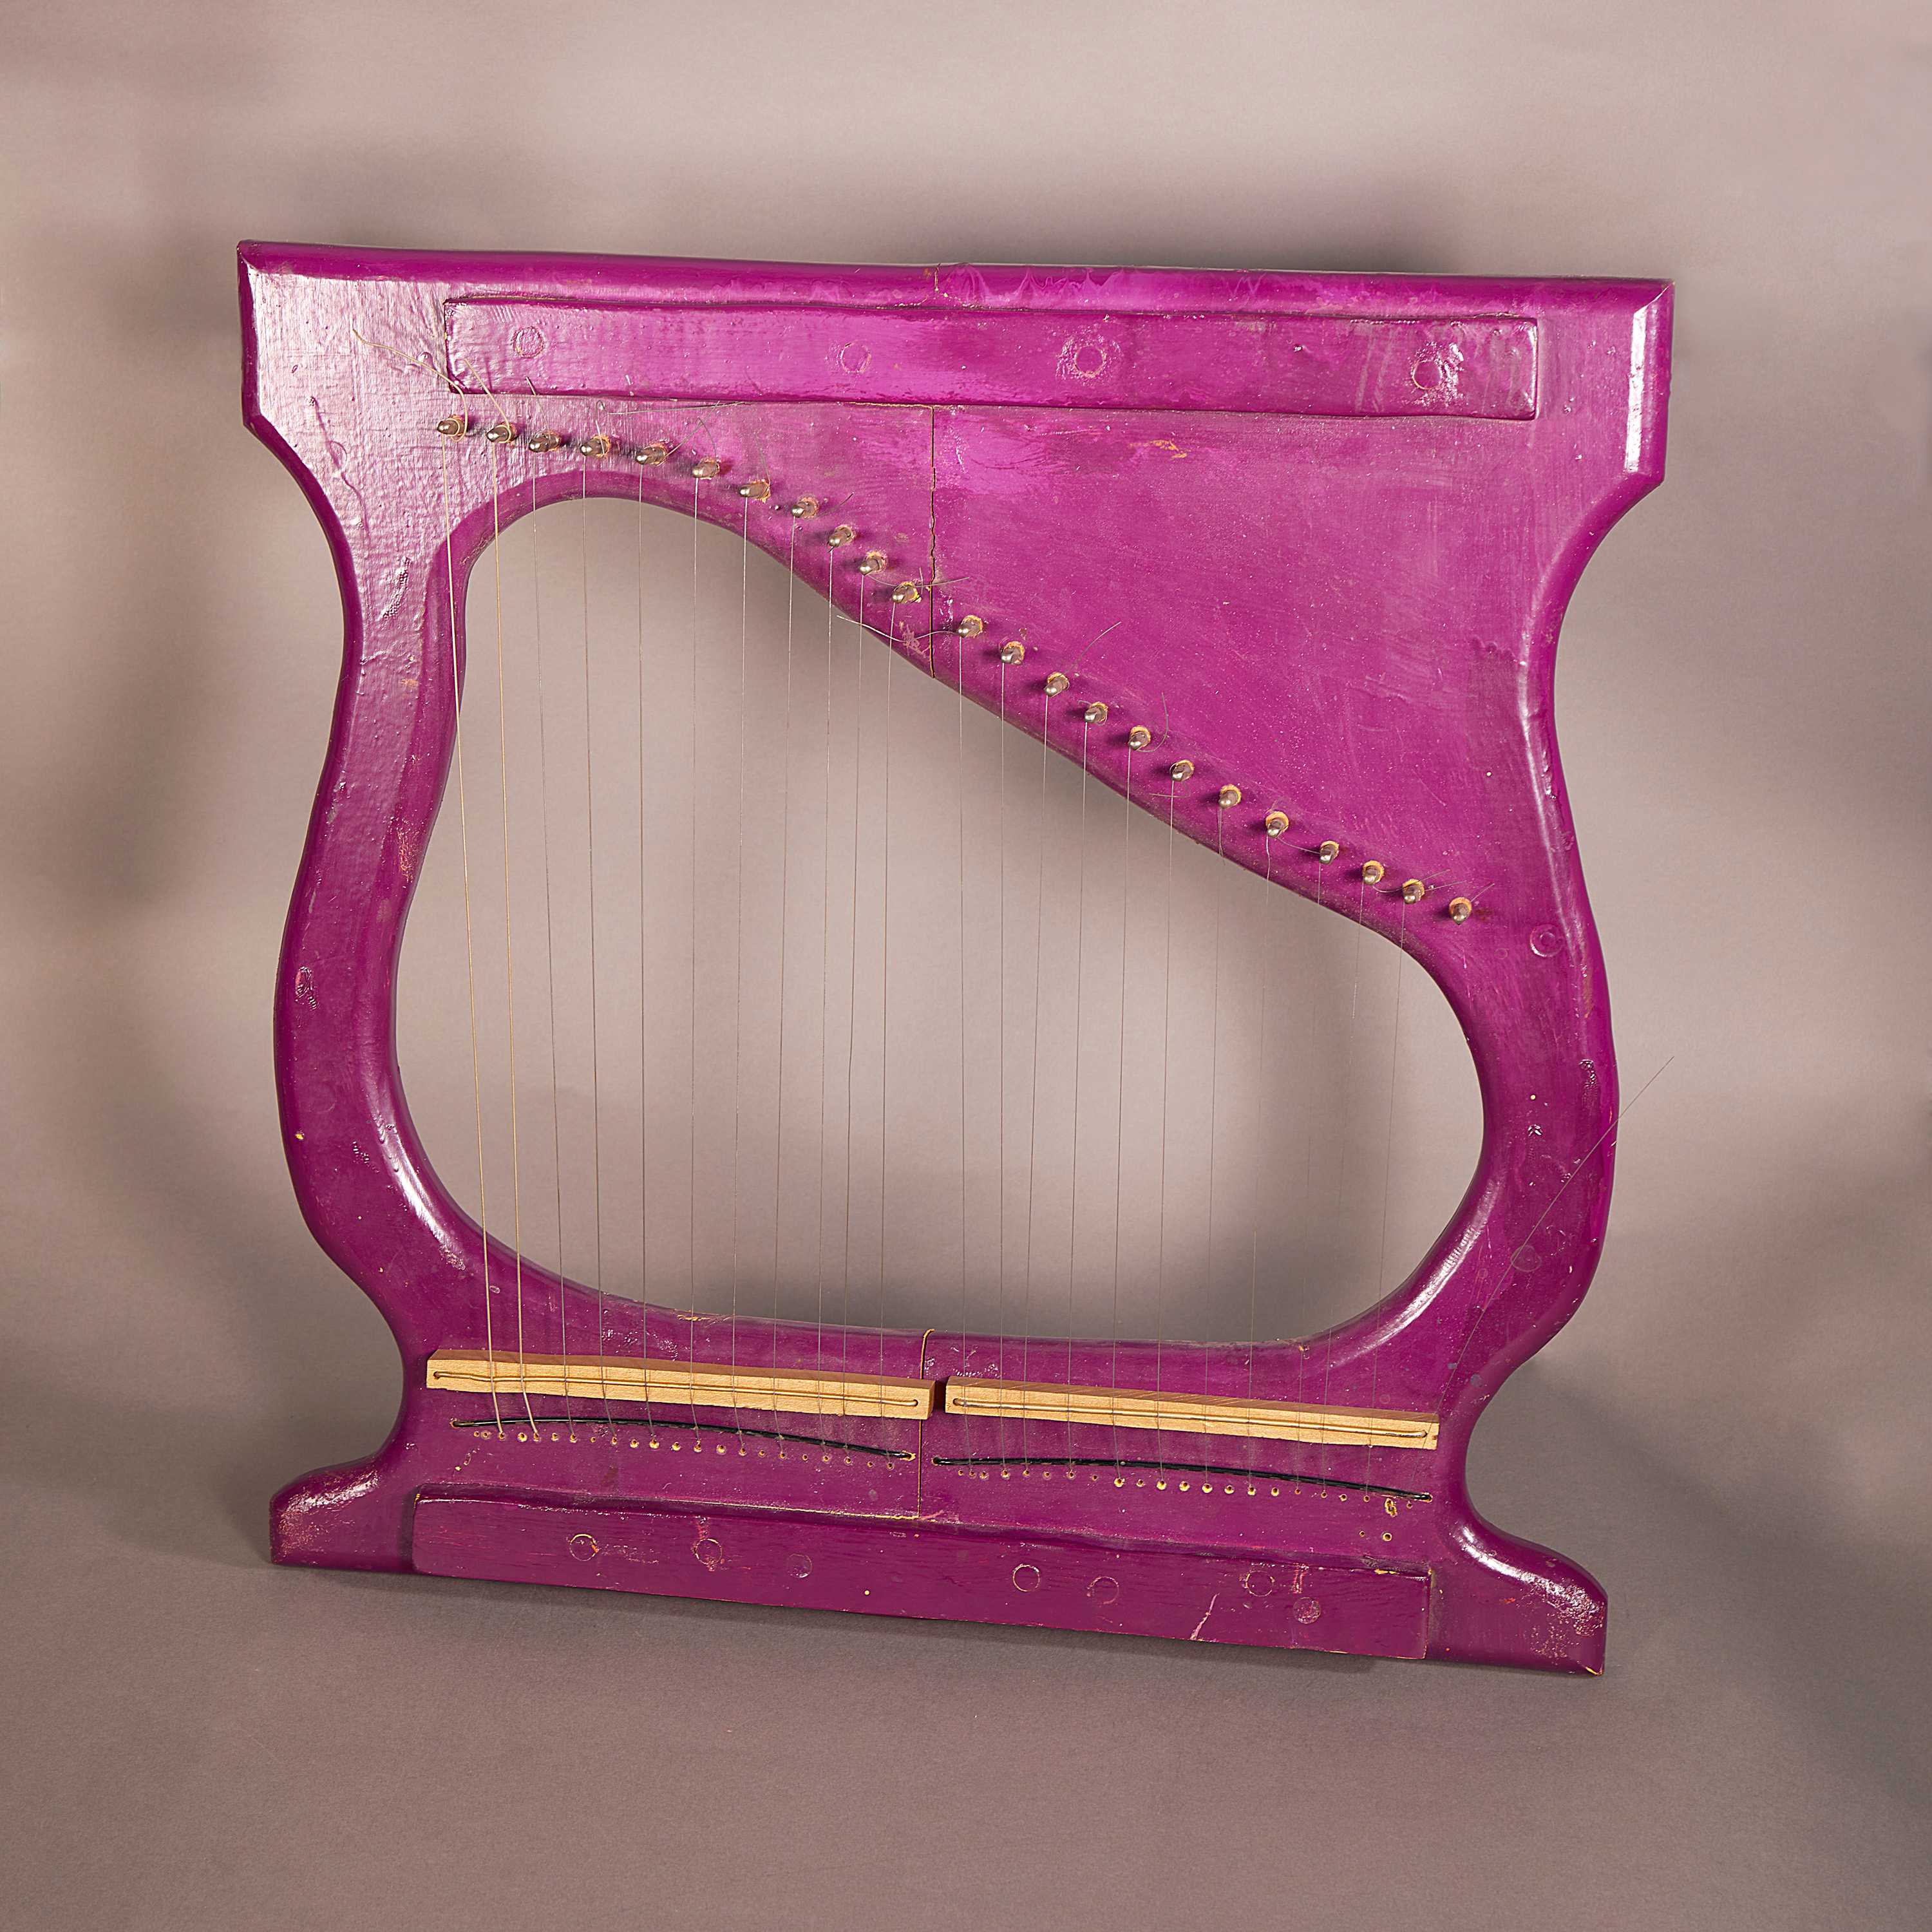 A vibrant pink harp has about 20 plus strings. It sits in front of a plain background.